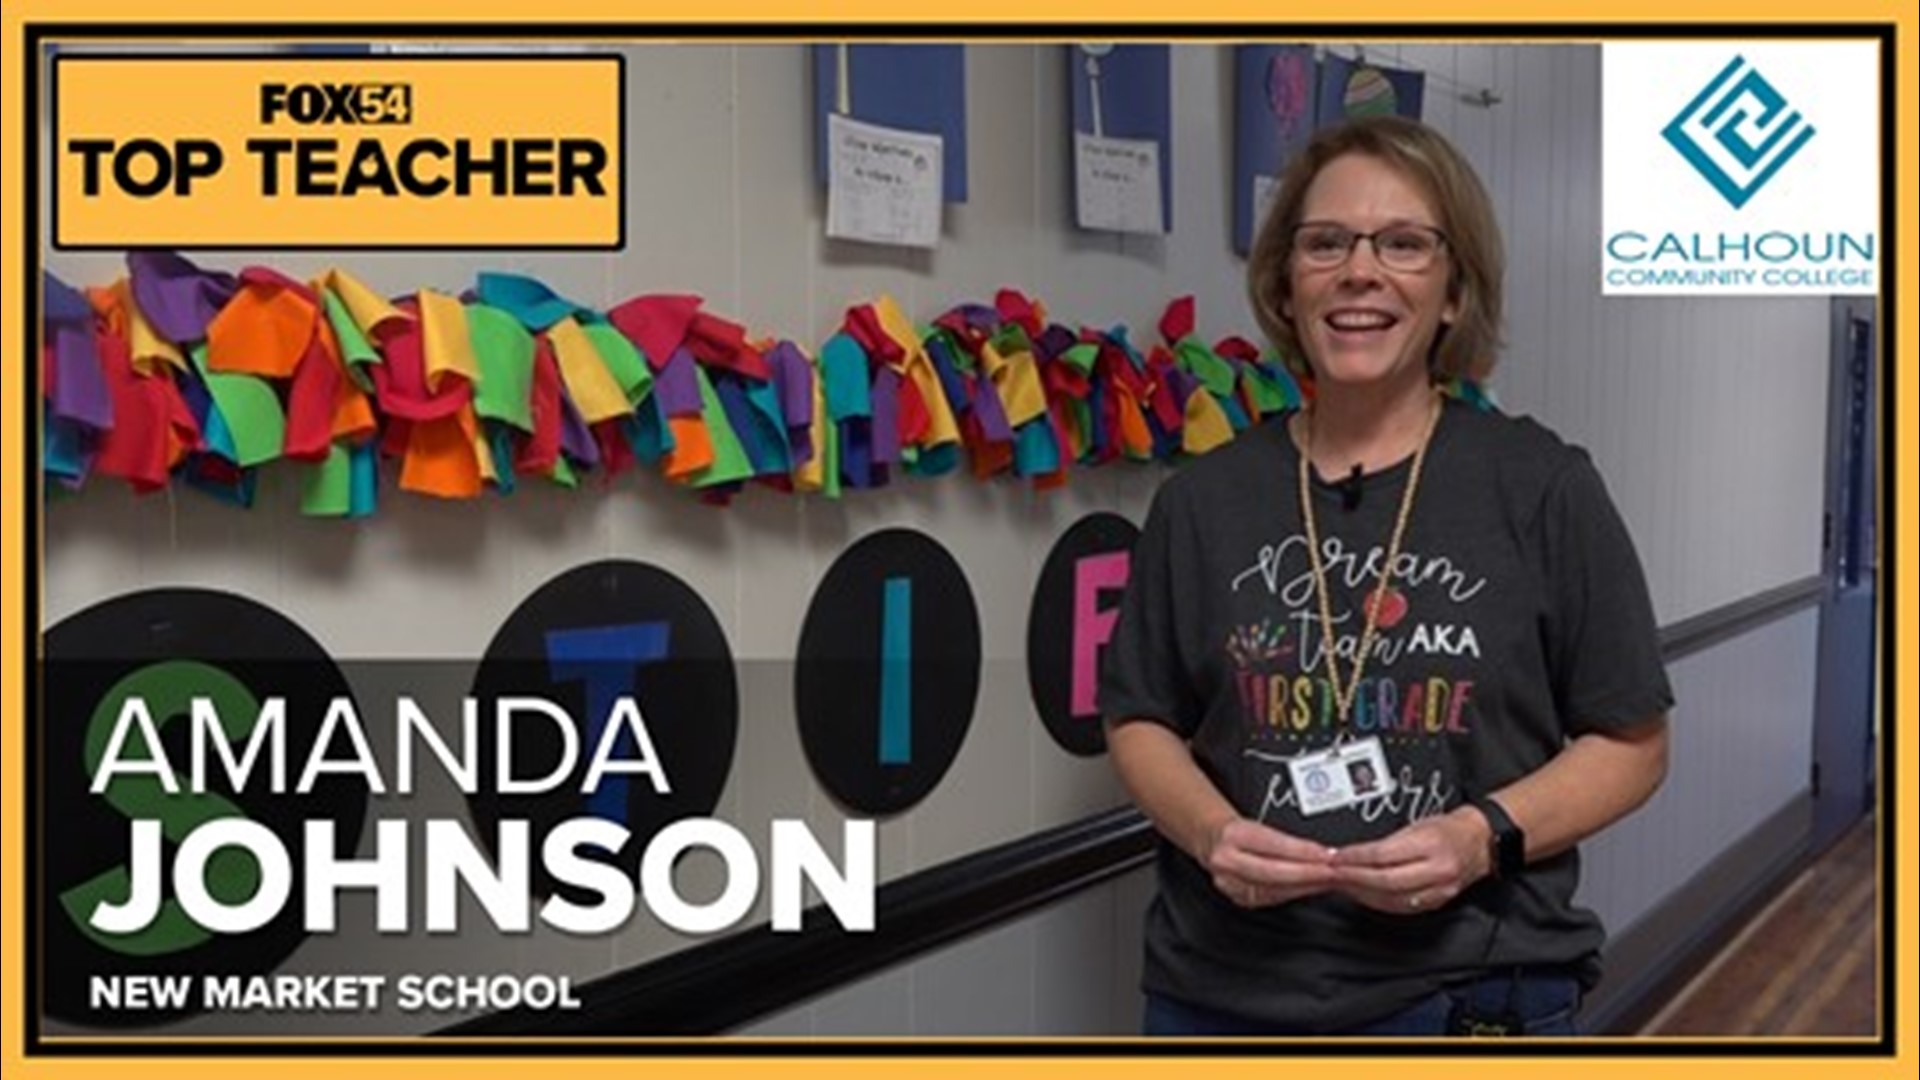 FOX54 Top Teacher Amanda Johnson has put in decades of dedication to her littles!
Even when she took a break from teaching, she returned to what she loves!